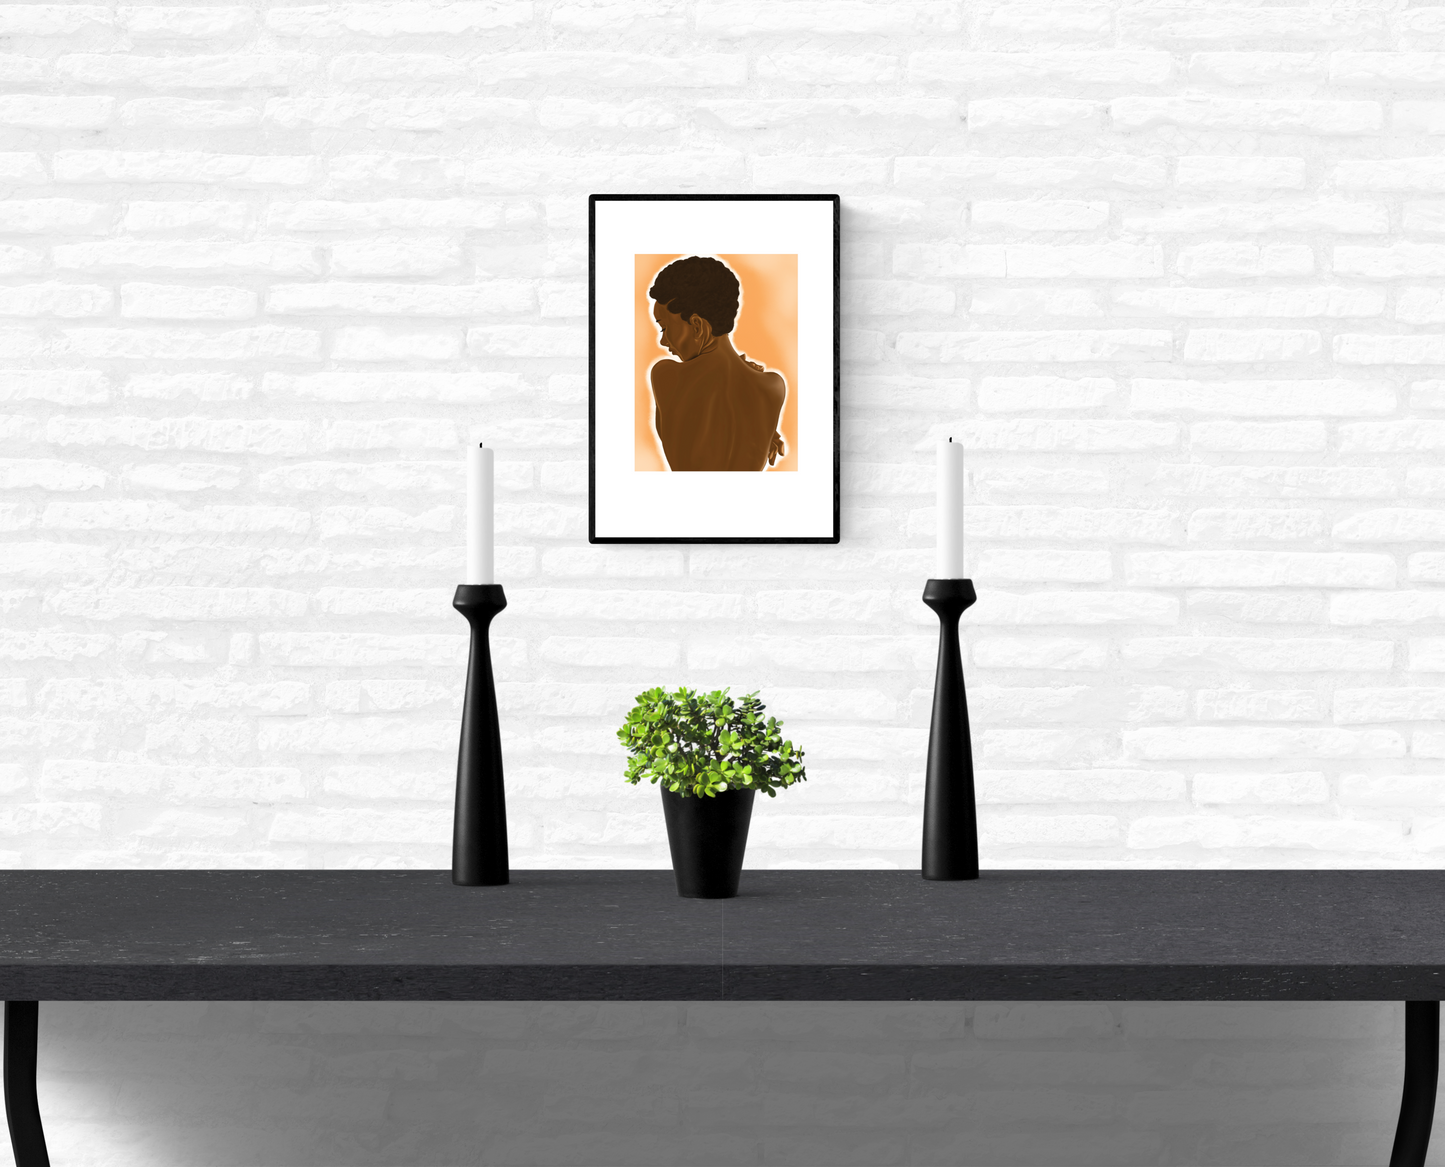 Art Illustration of a black woman’s nude back, framed and mounted on an interior white brick wall